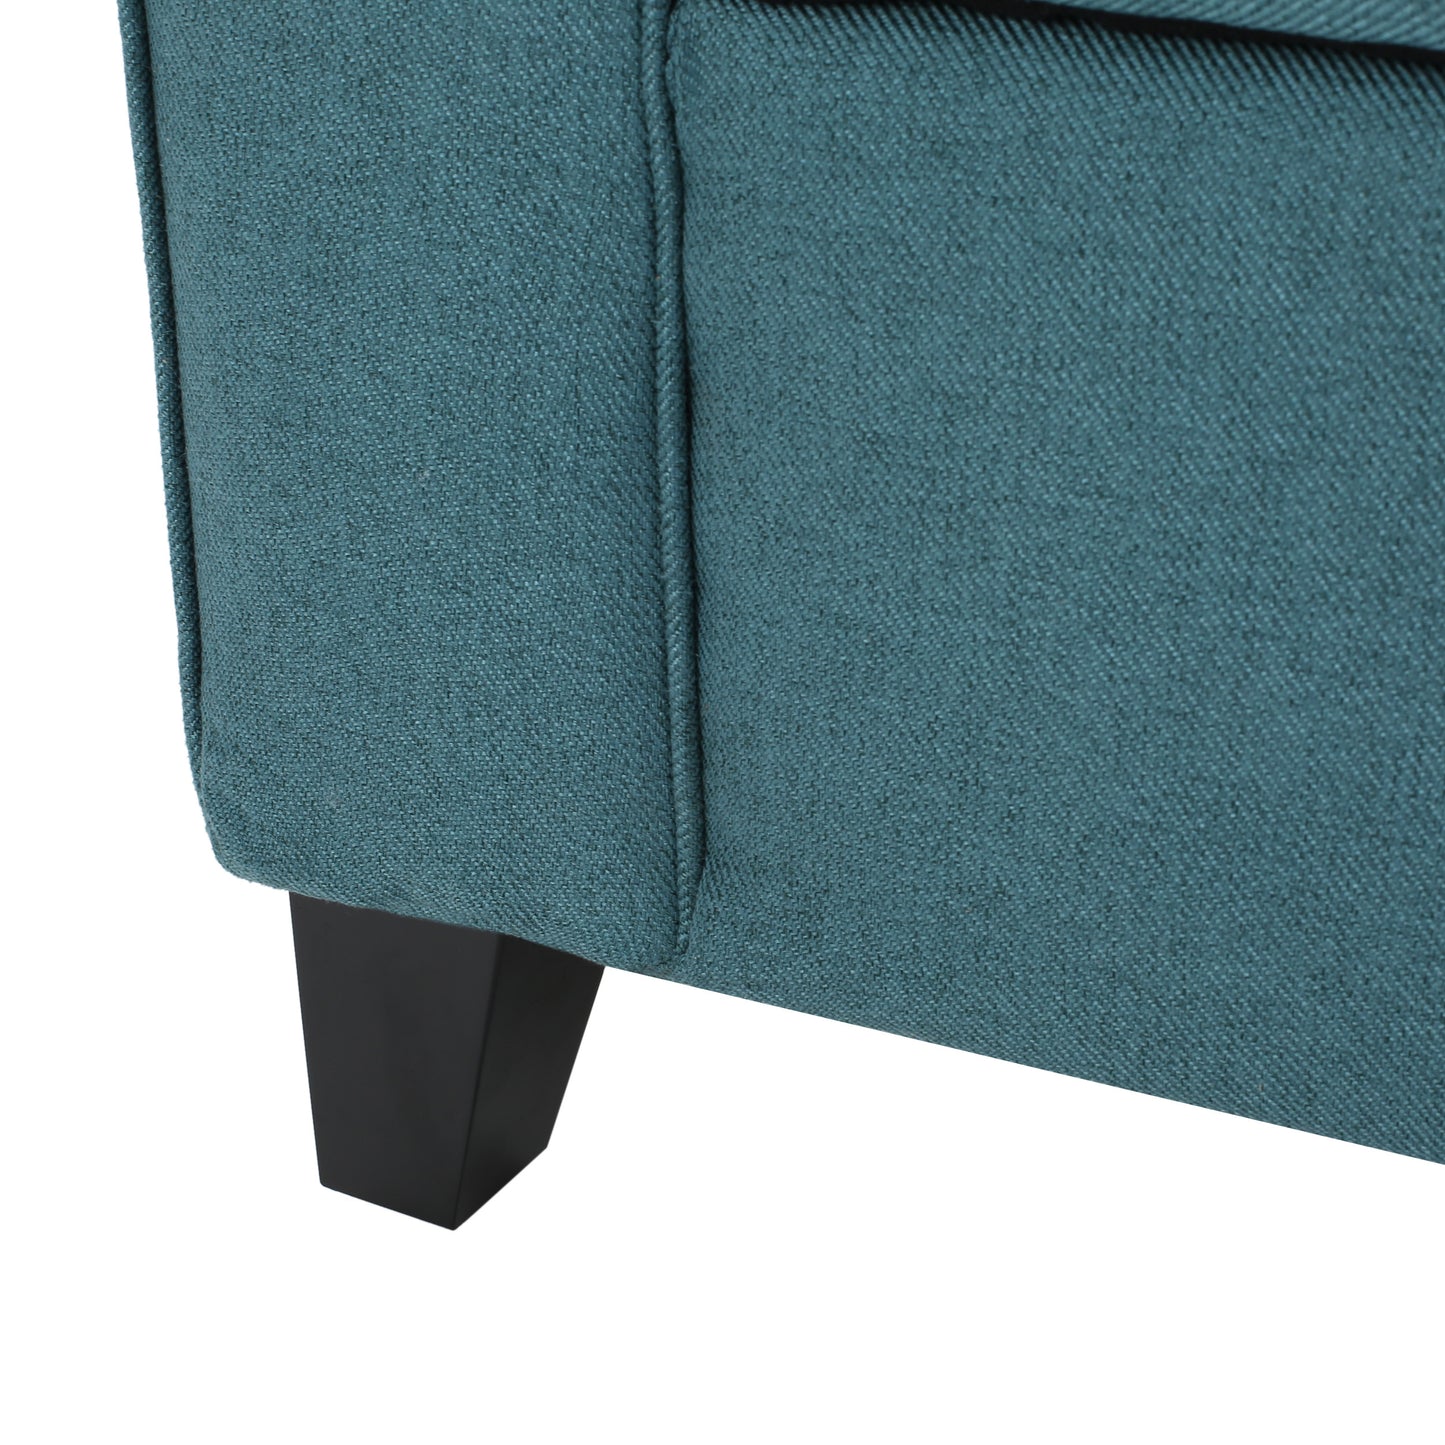 Danbury Contemporary Fabric Upholstered Storage Ottoman Bench with Rolled Arms